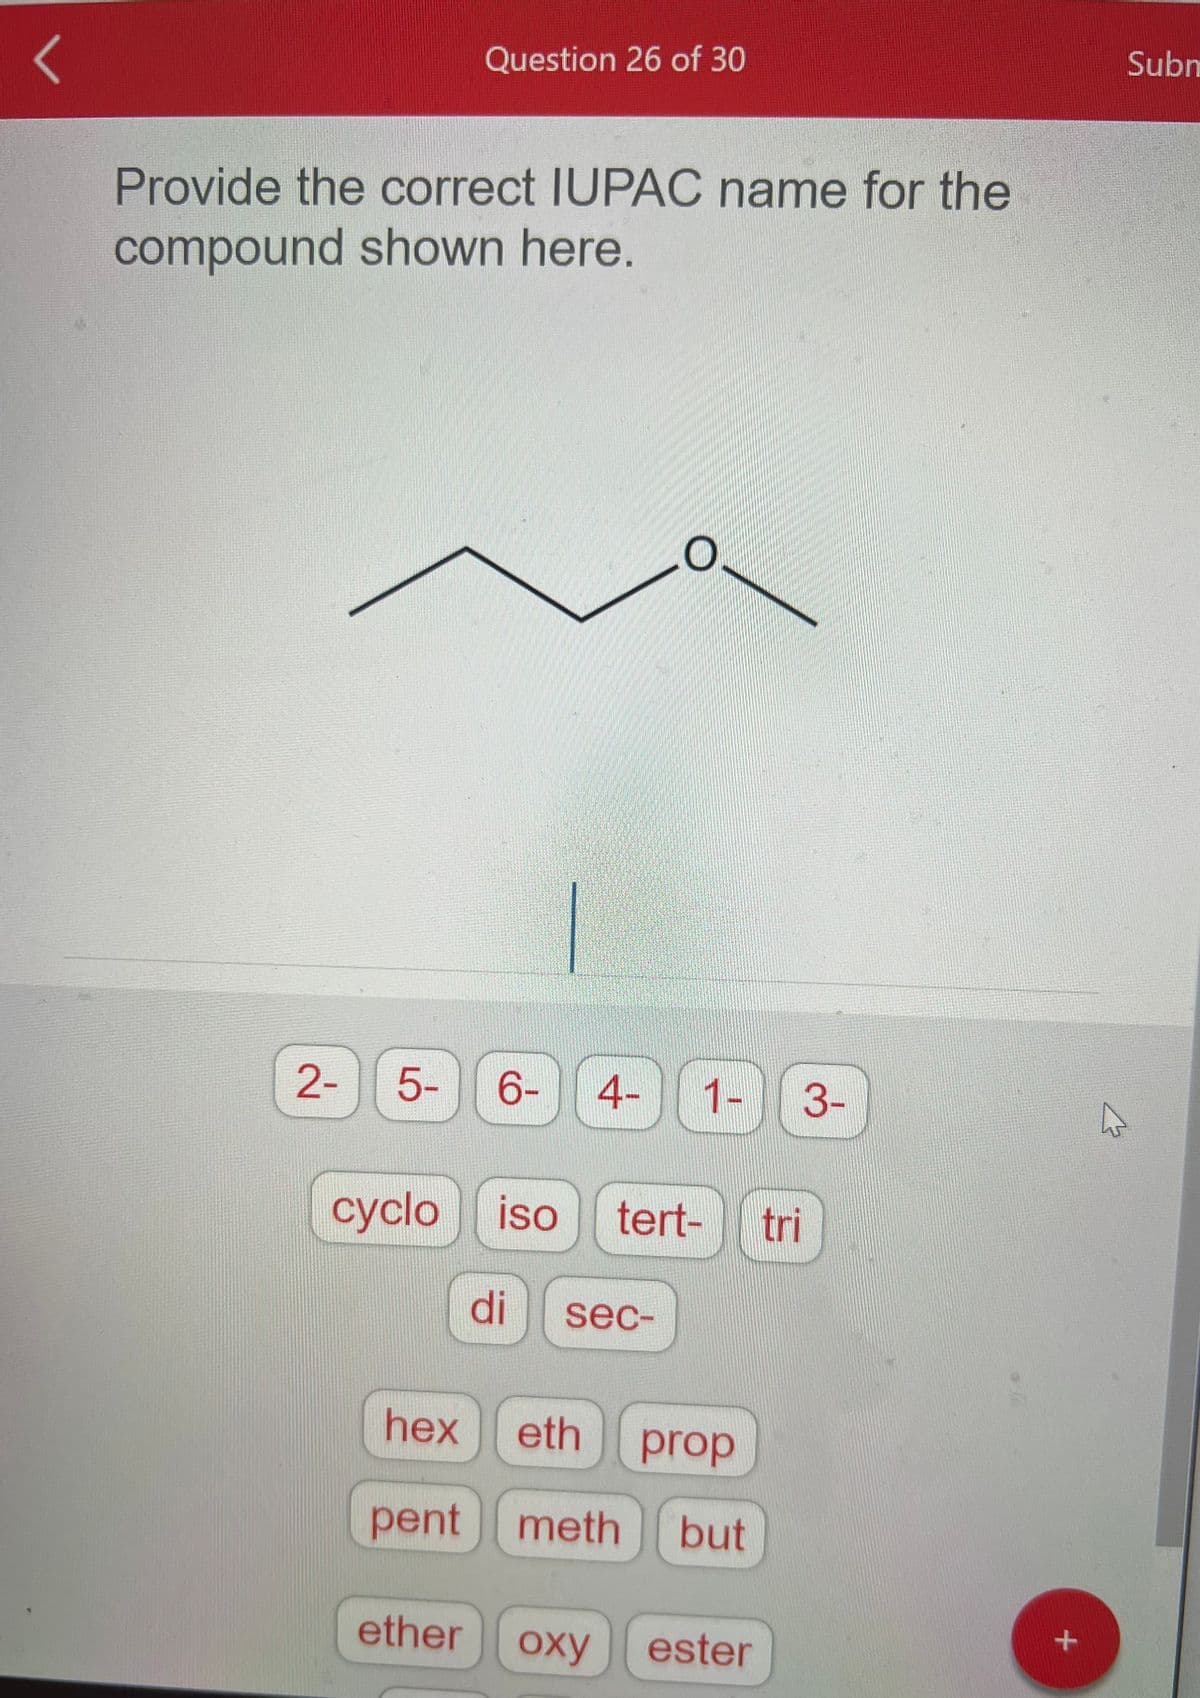 <
Provide the correct IUPAC name for the
compound shown here.
2-
5-
Question 26 of 30
hex
pent
6-
O
4- 1- 3-
cyclo iso tert- tri
di sec-
eth prop
meth but
ether oxy ester
+
Subm